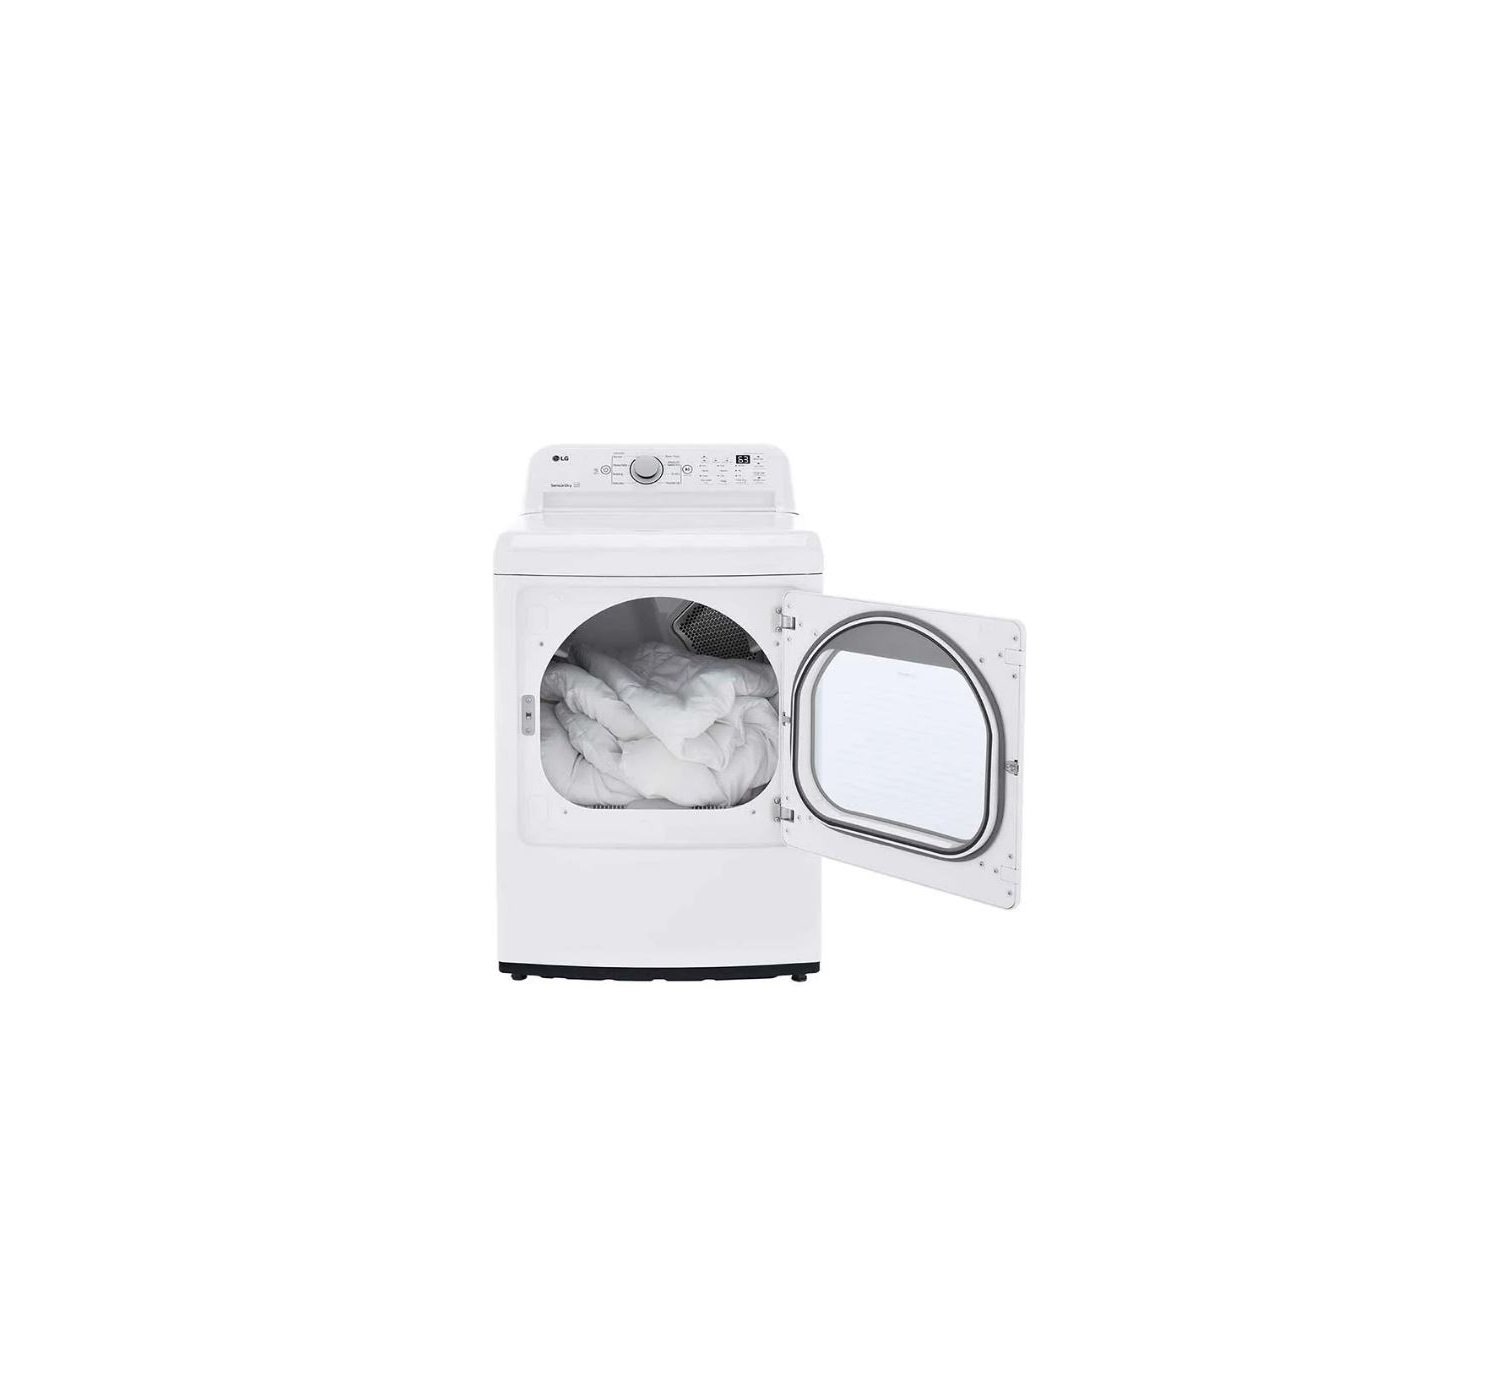 LG DLE7150W Ultra Large Capacity Electric Dryer User Manual - feature image